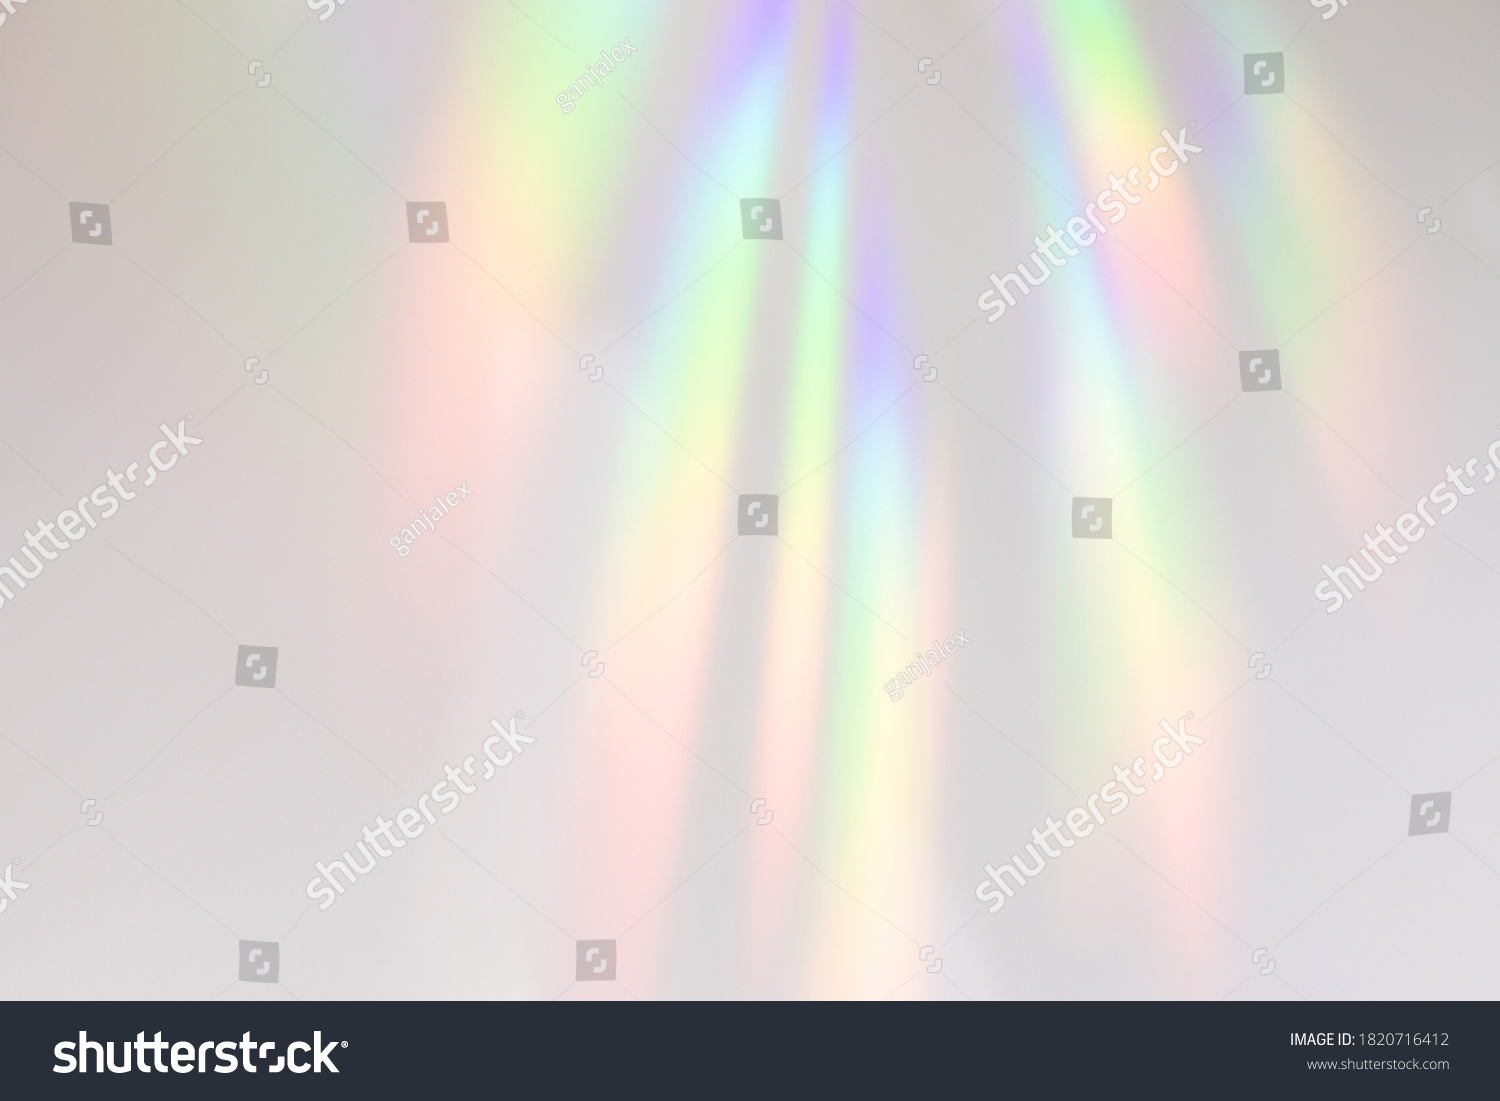 Blurred rainbow light refraction texture overlay effect for photo and mockups. Organic drop diagonal holographic flare on a white wall. Shadows for natural light effects #1820716412